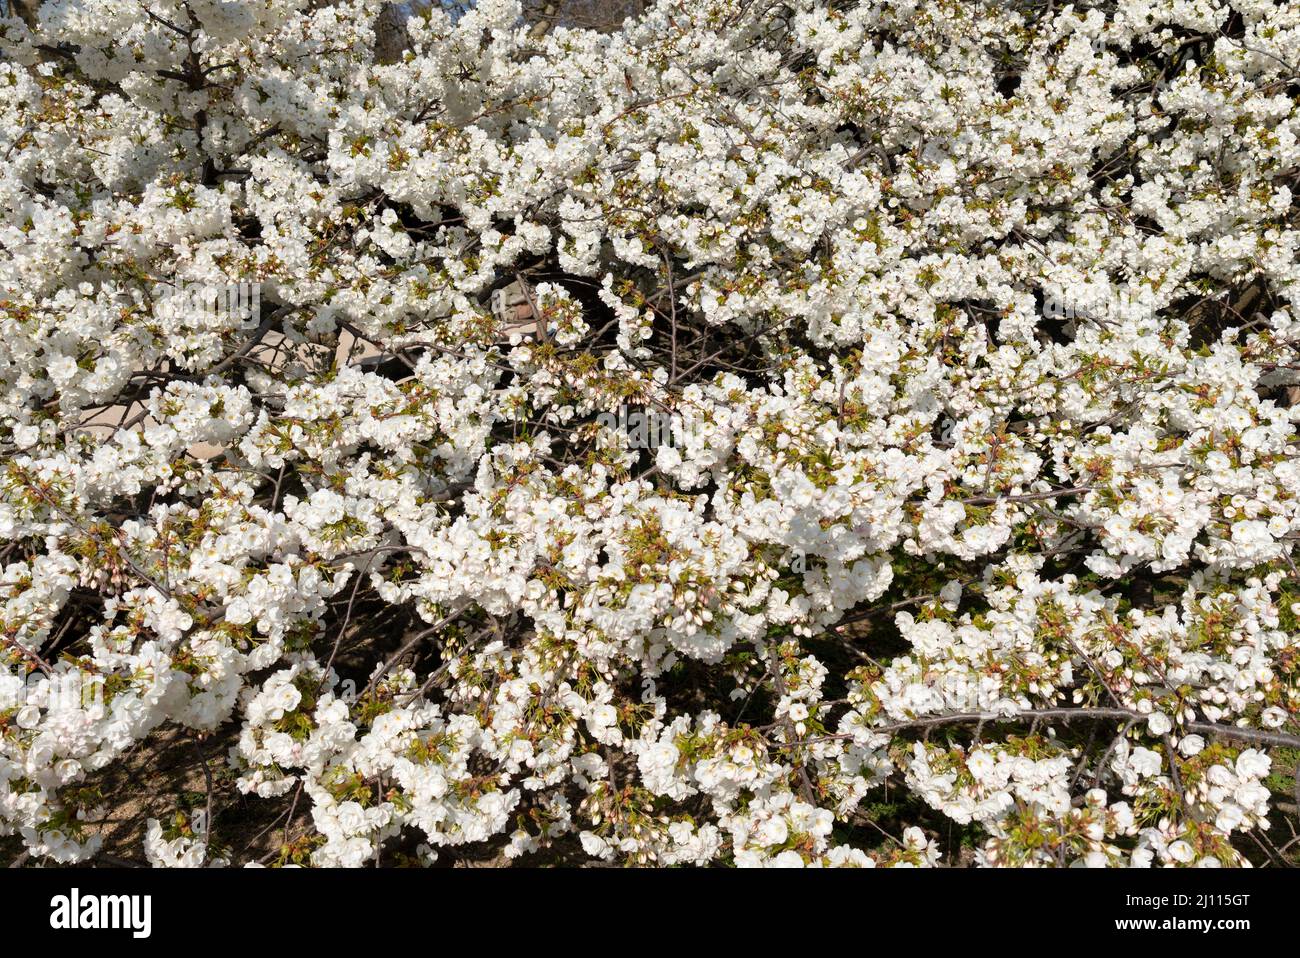 Cherry tree with white flowers in full bloom in the Jardin des Plantes in Paris Stock Photo